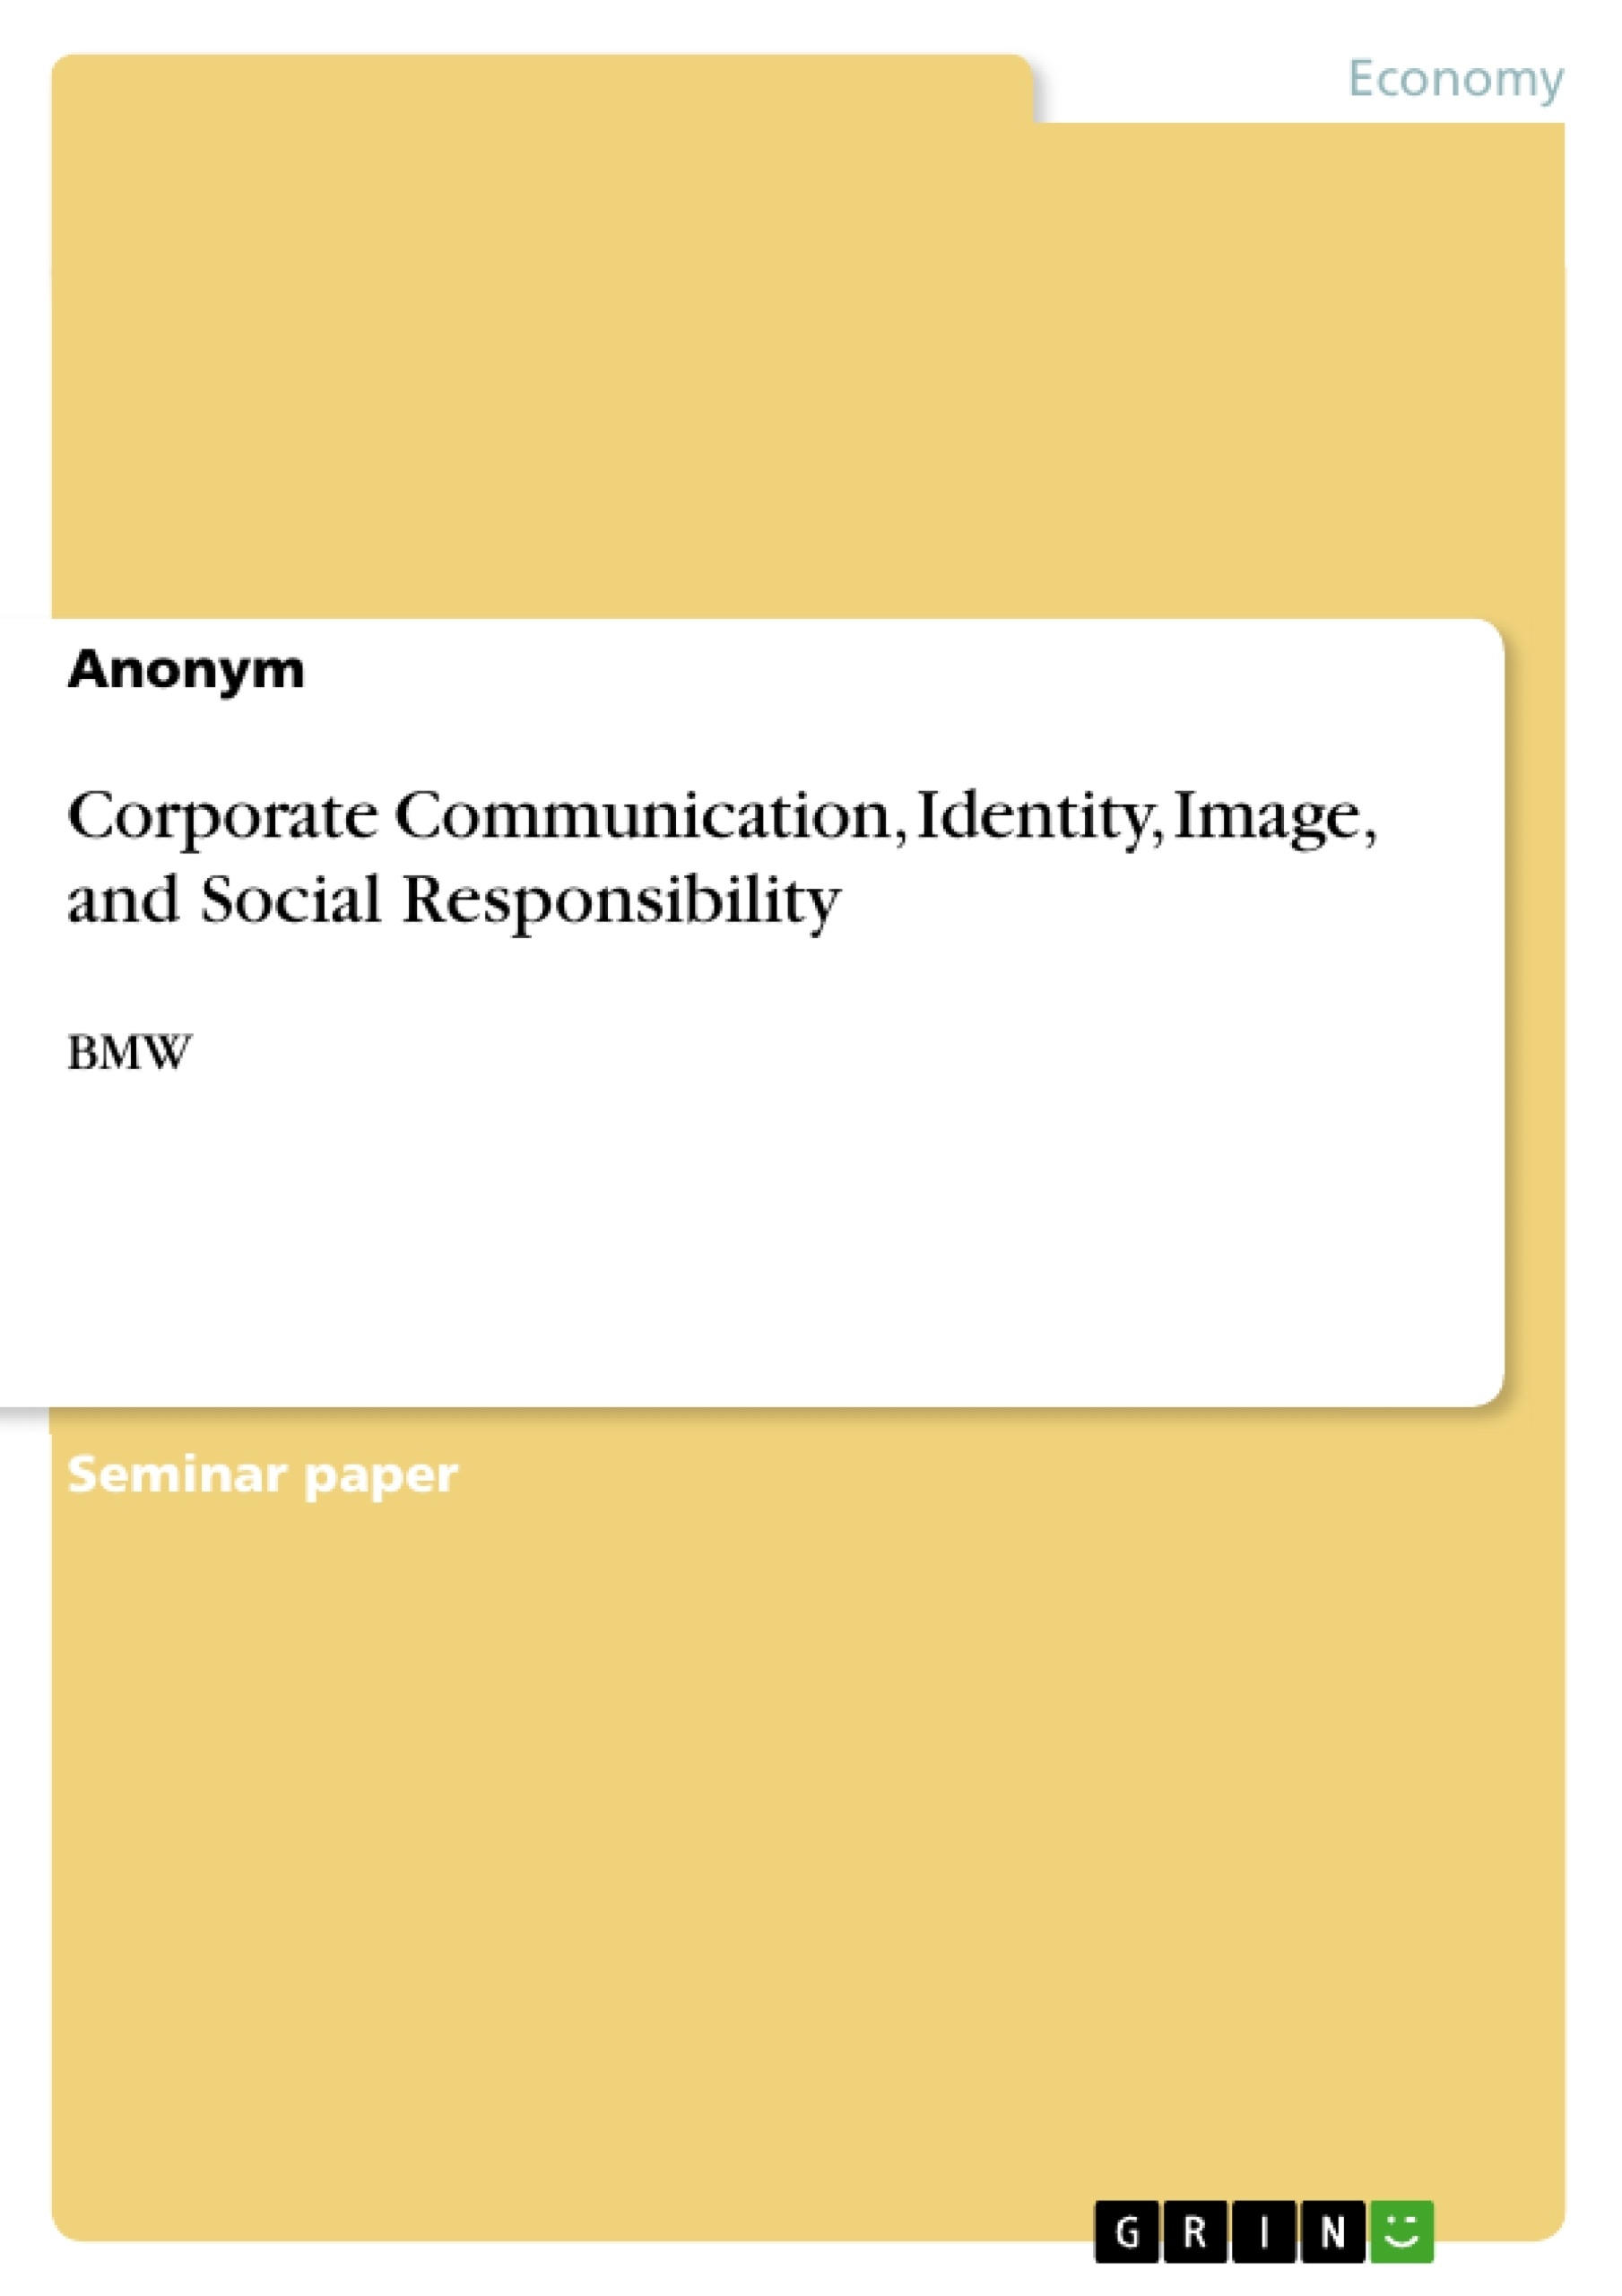 Title: Corporate Communication, Identity, Image, and Social Responsibility